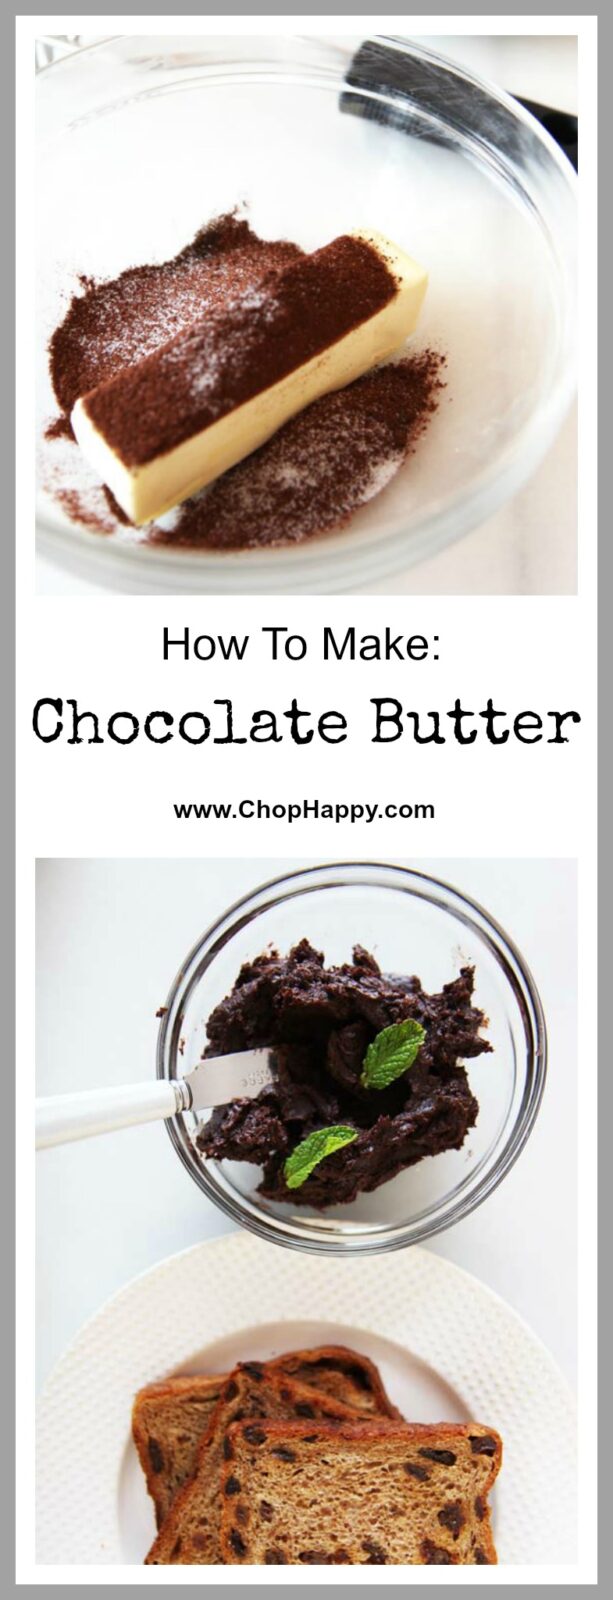 How to Make Chocolate Butter Recipe